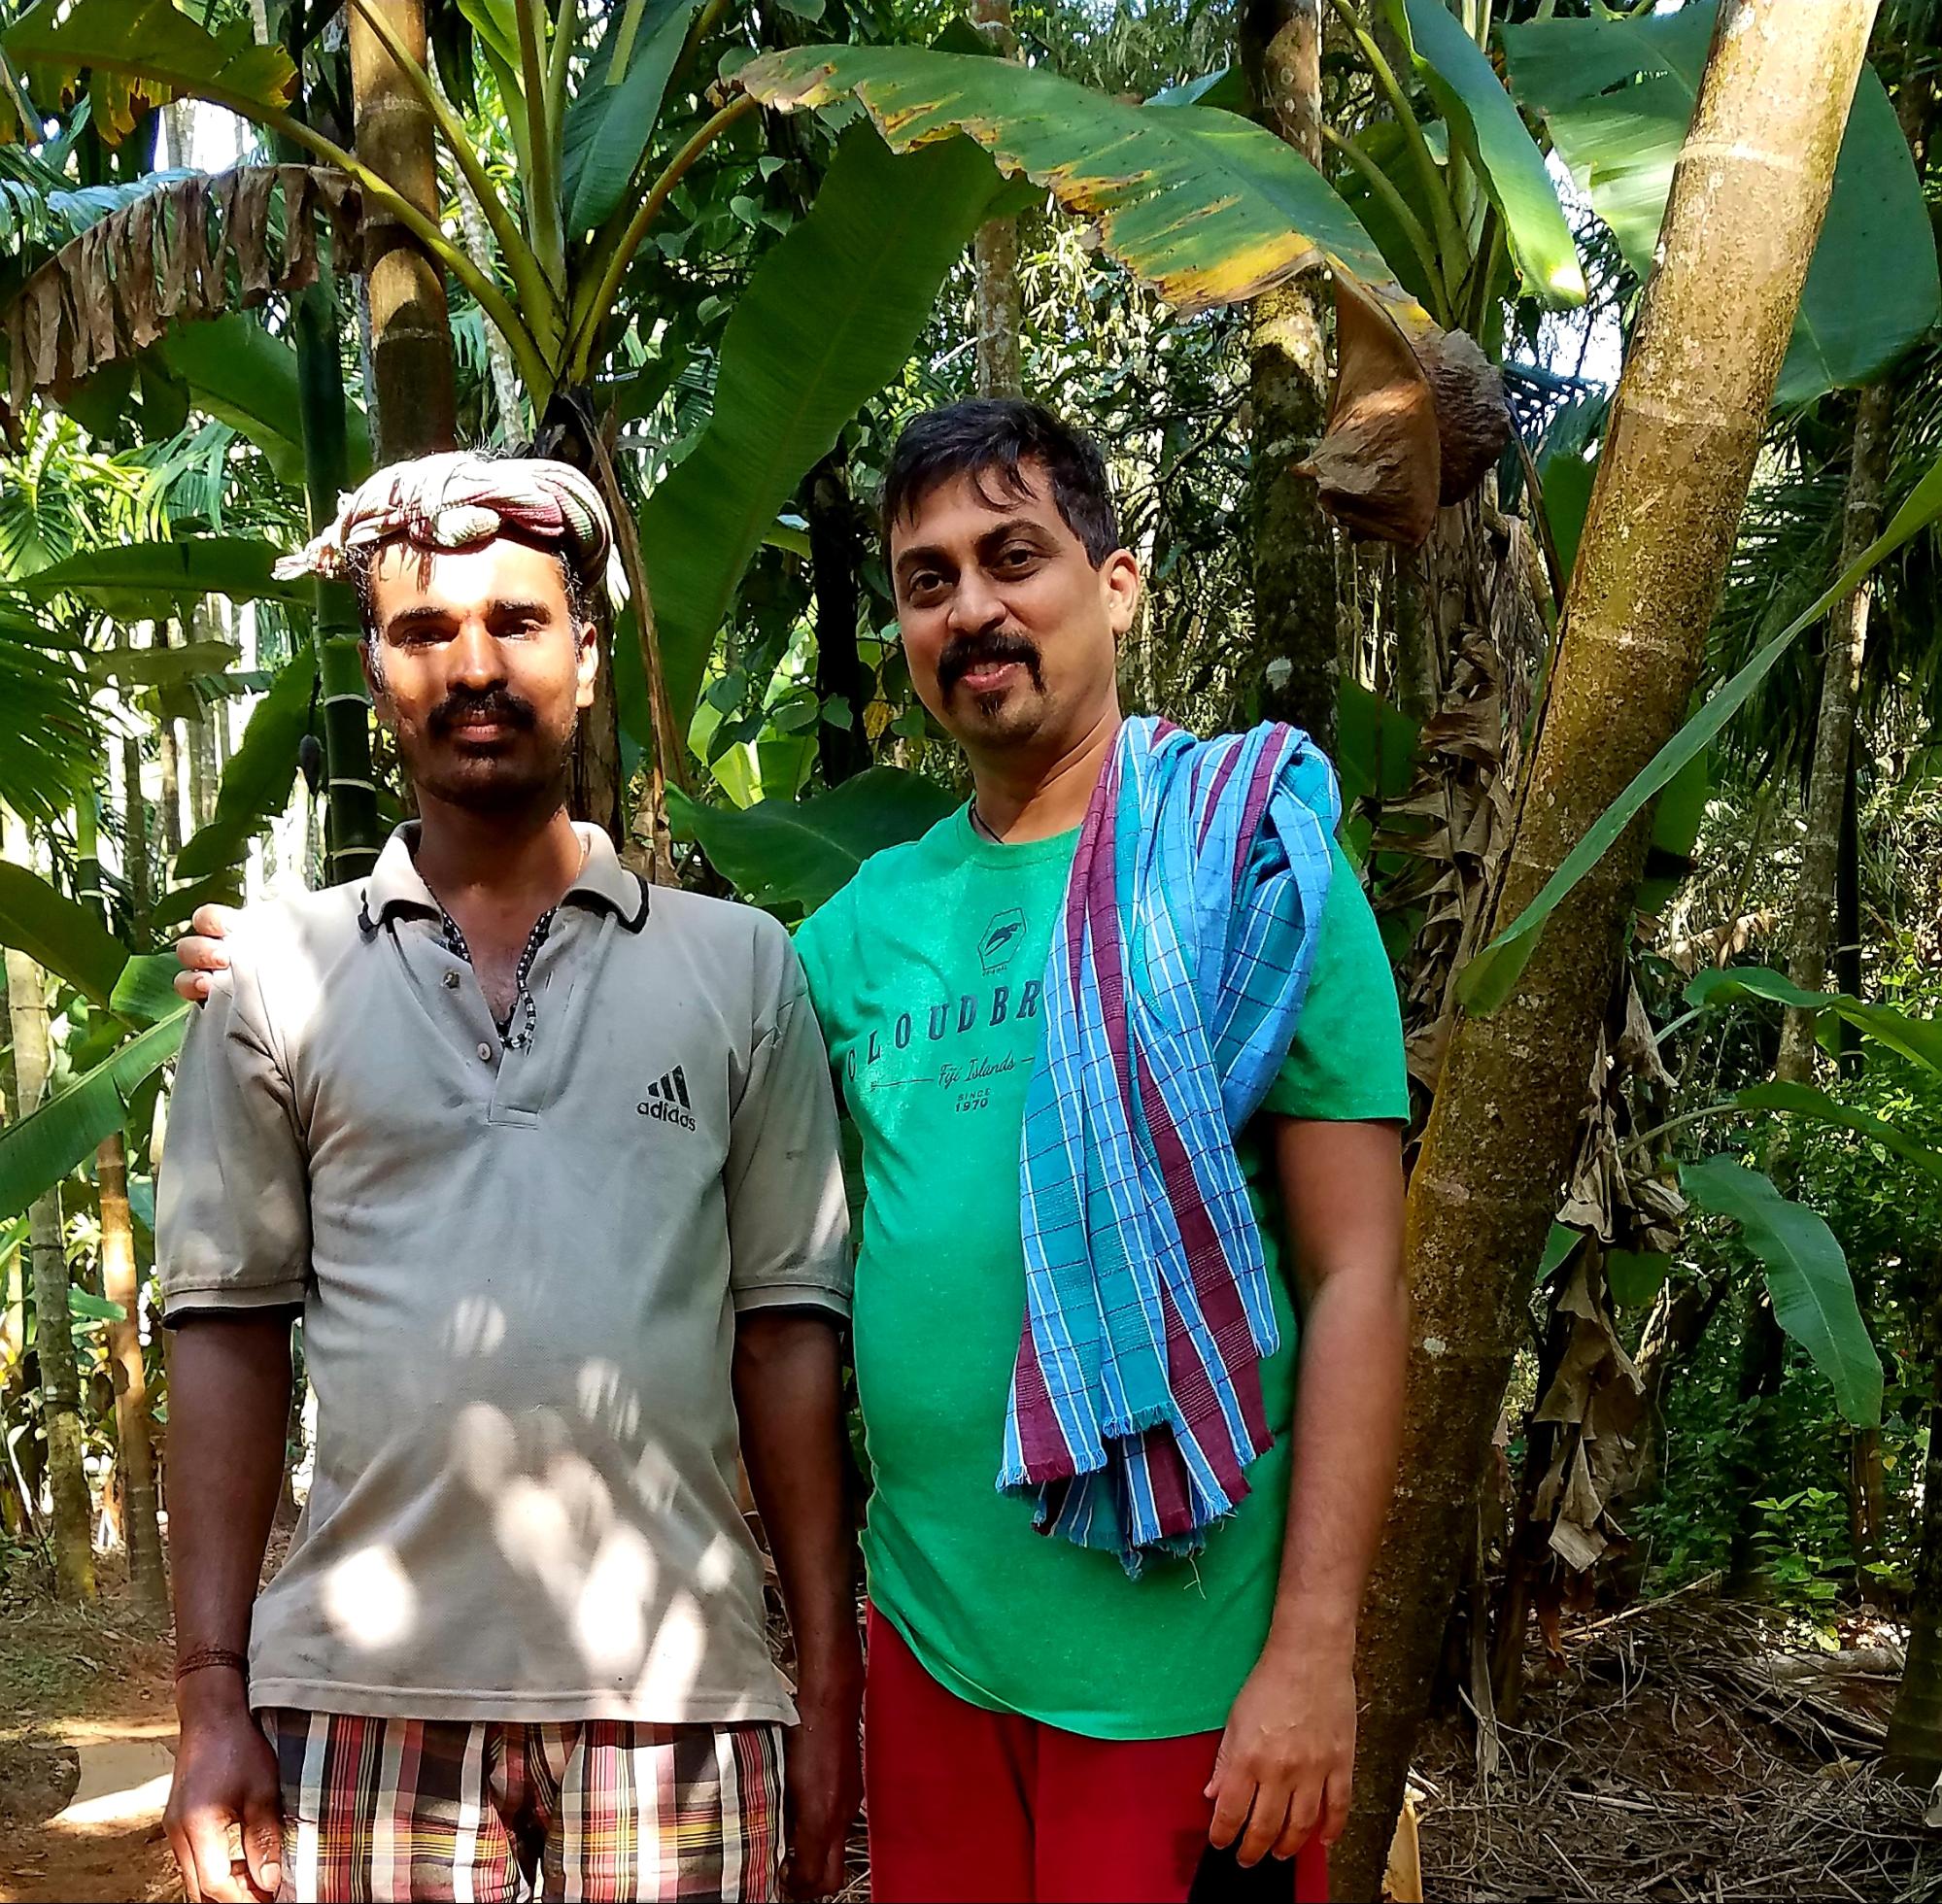 A local farmer and Rajeev Bhat learning from each other in India. Photo credit: Private collection